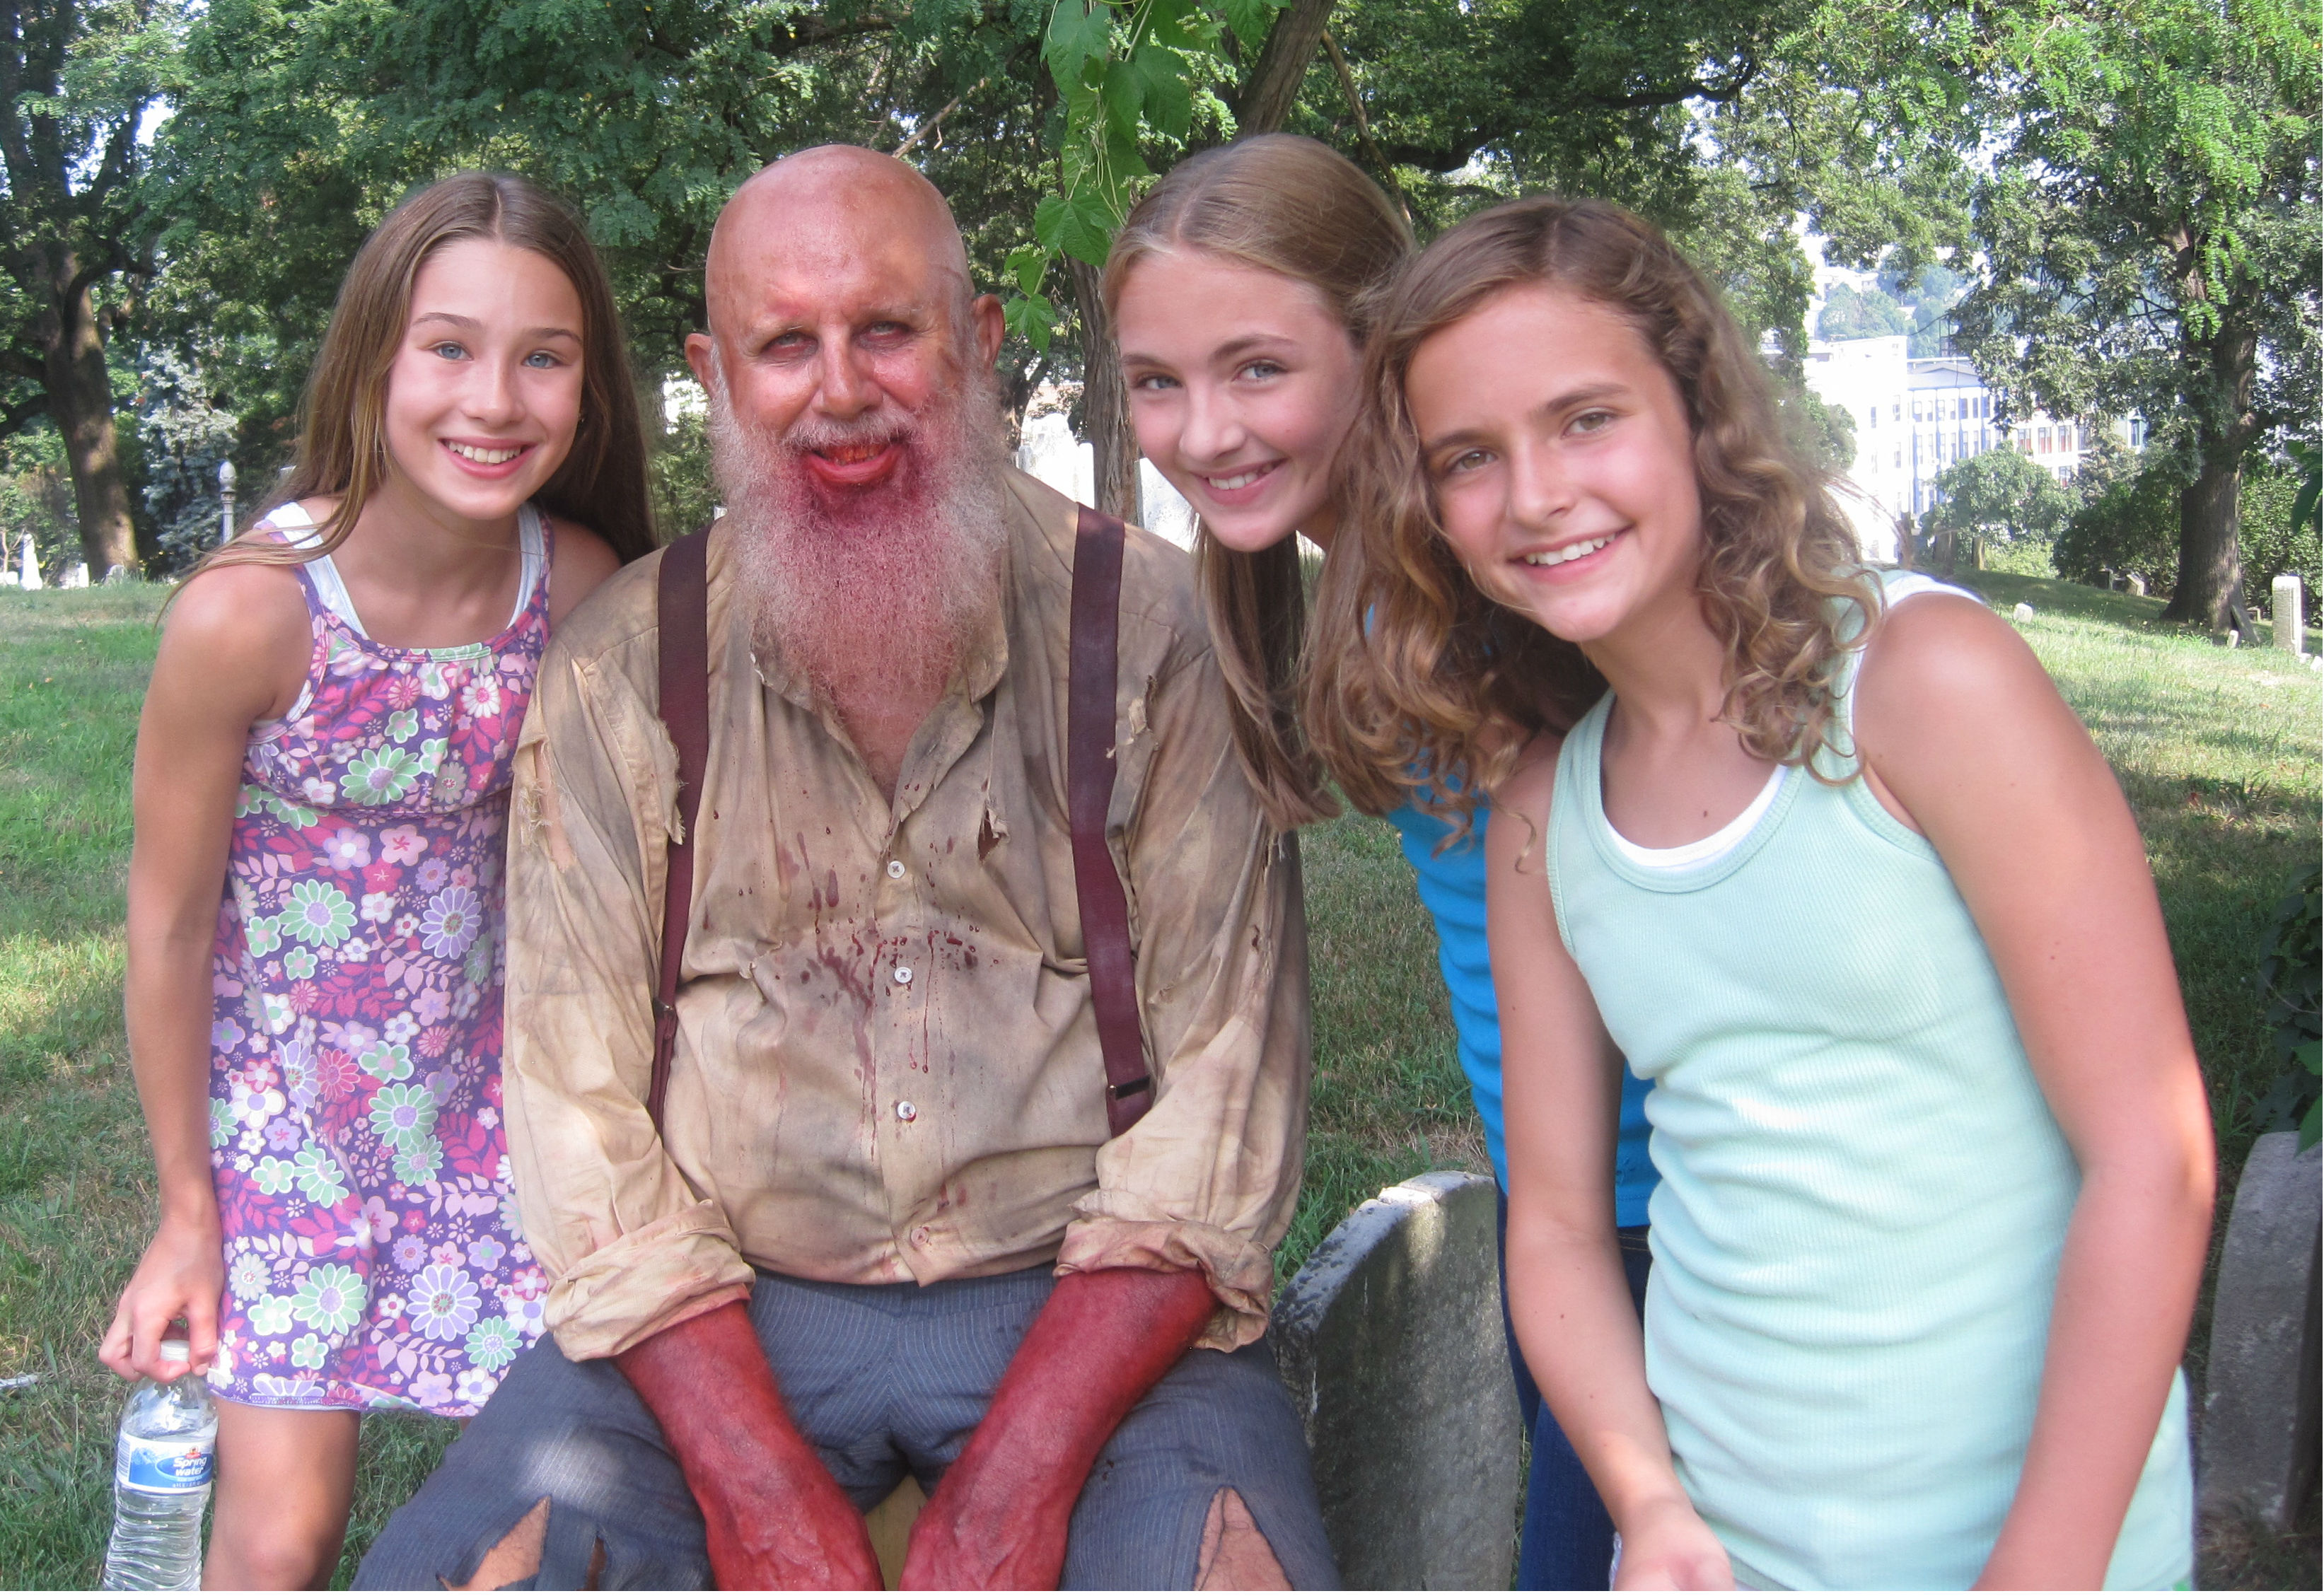 Kylie with costars Steve Ventin, Jenna Fiore and Alana Smith on the set of Celebrity Ghost Stories (Biography Channel).